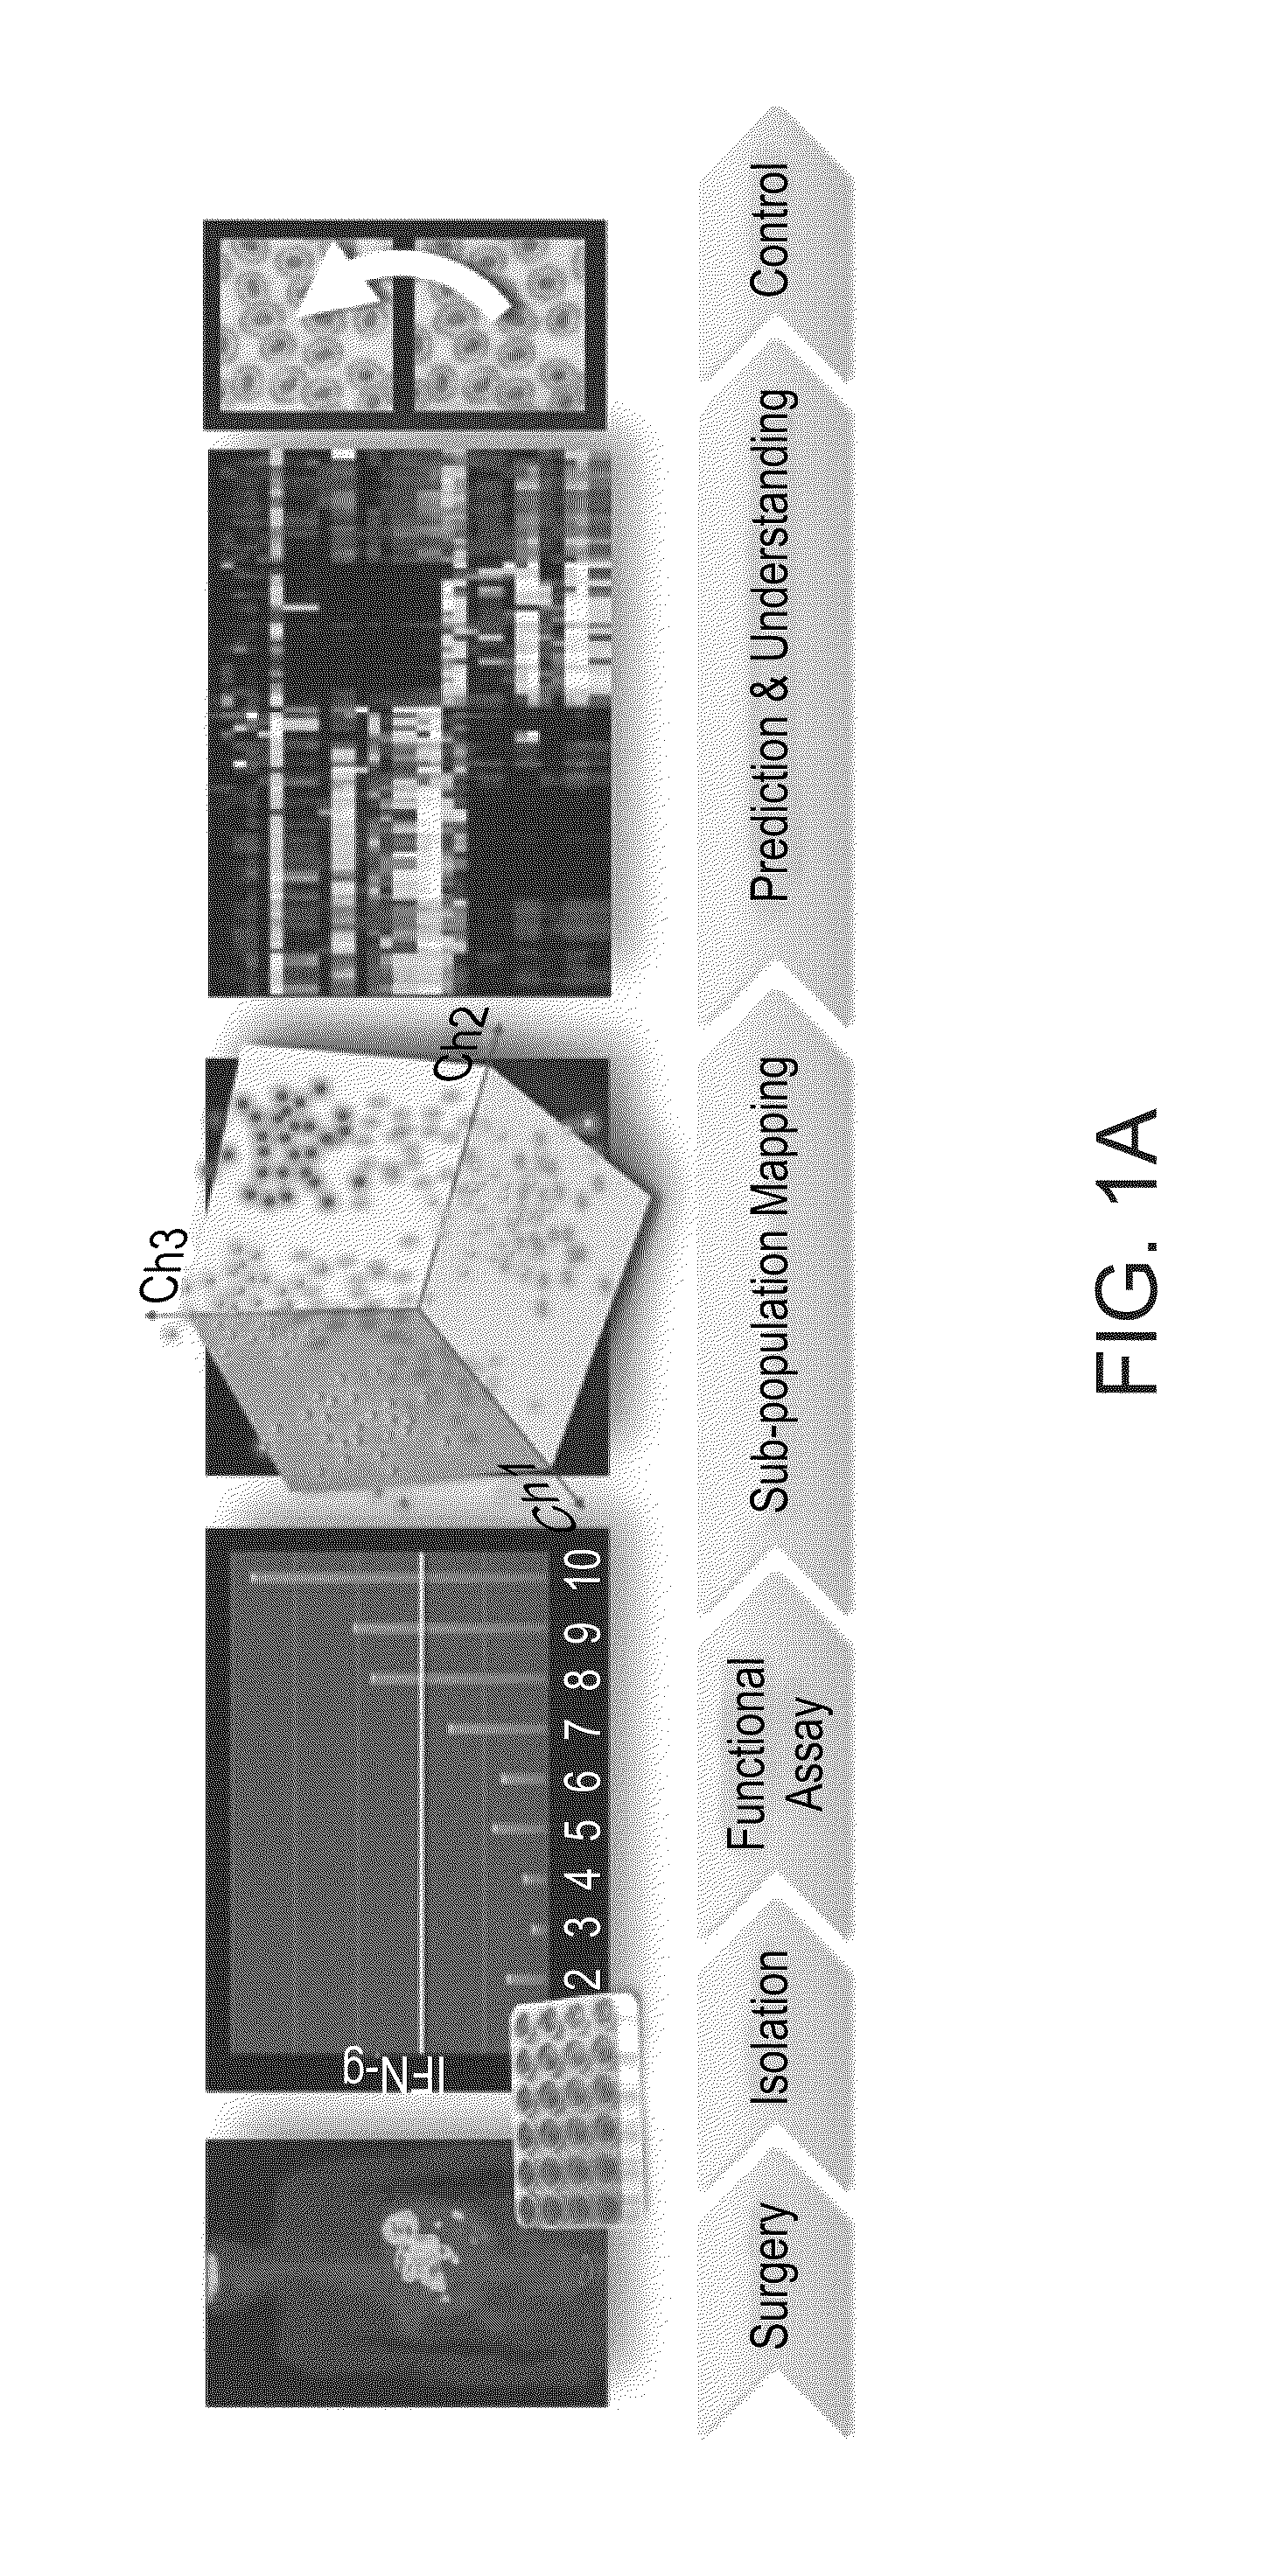 Method of predicting responsiveness to autologous adoptive cell transfer therapy